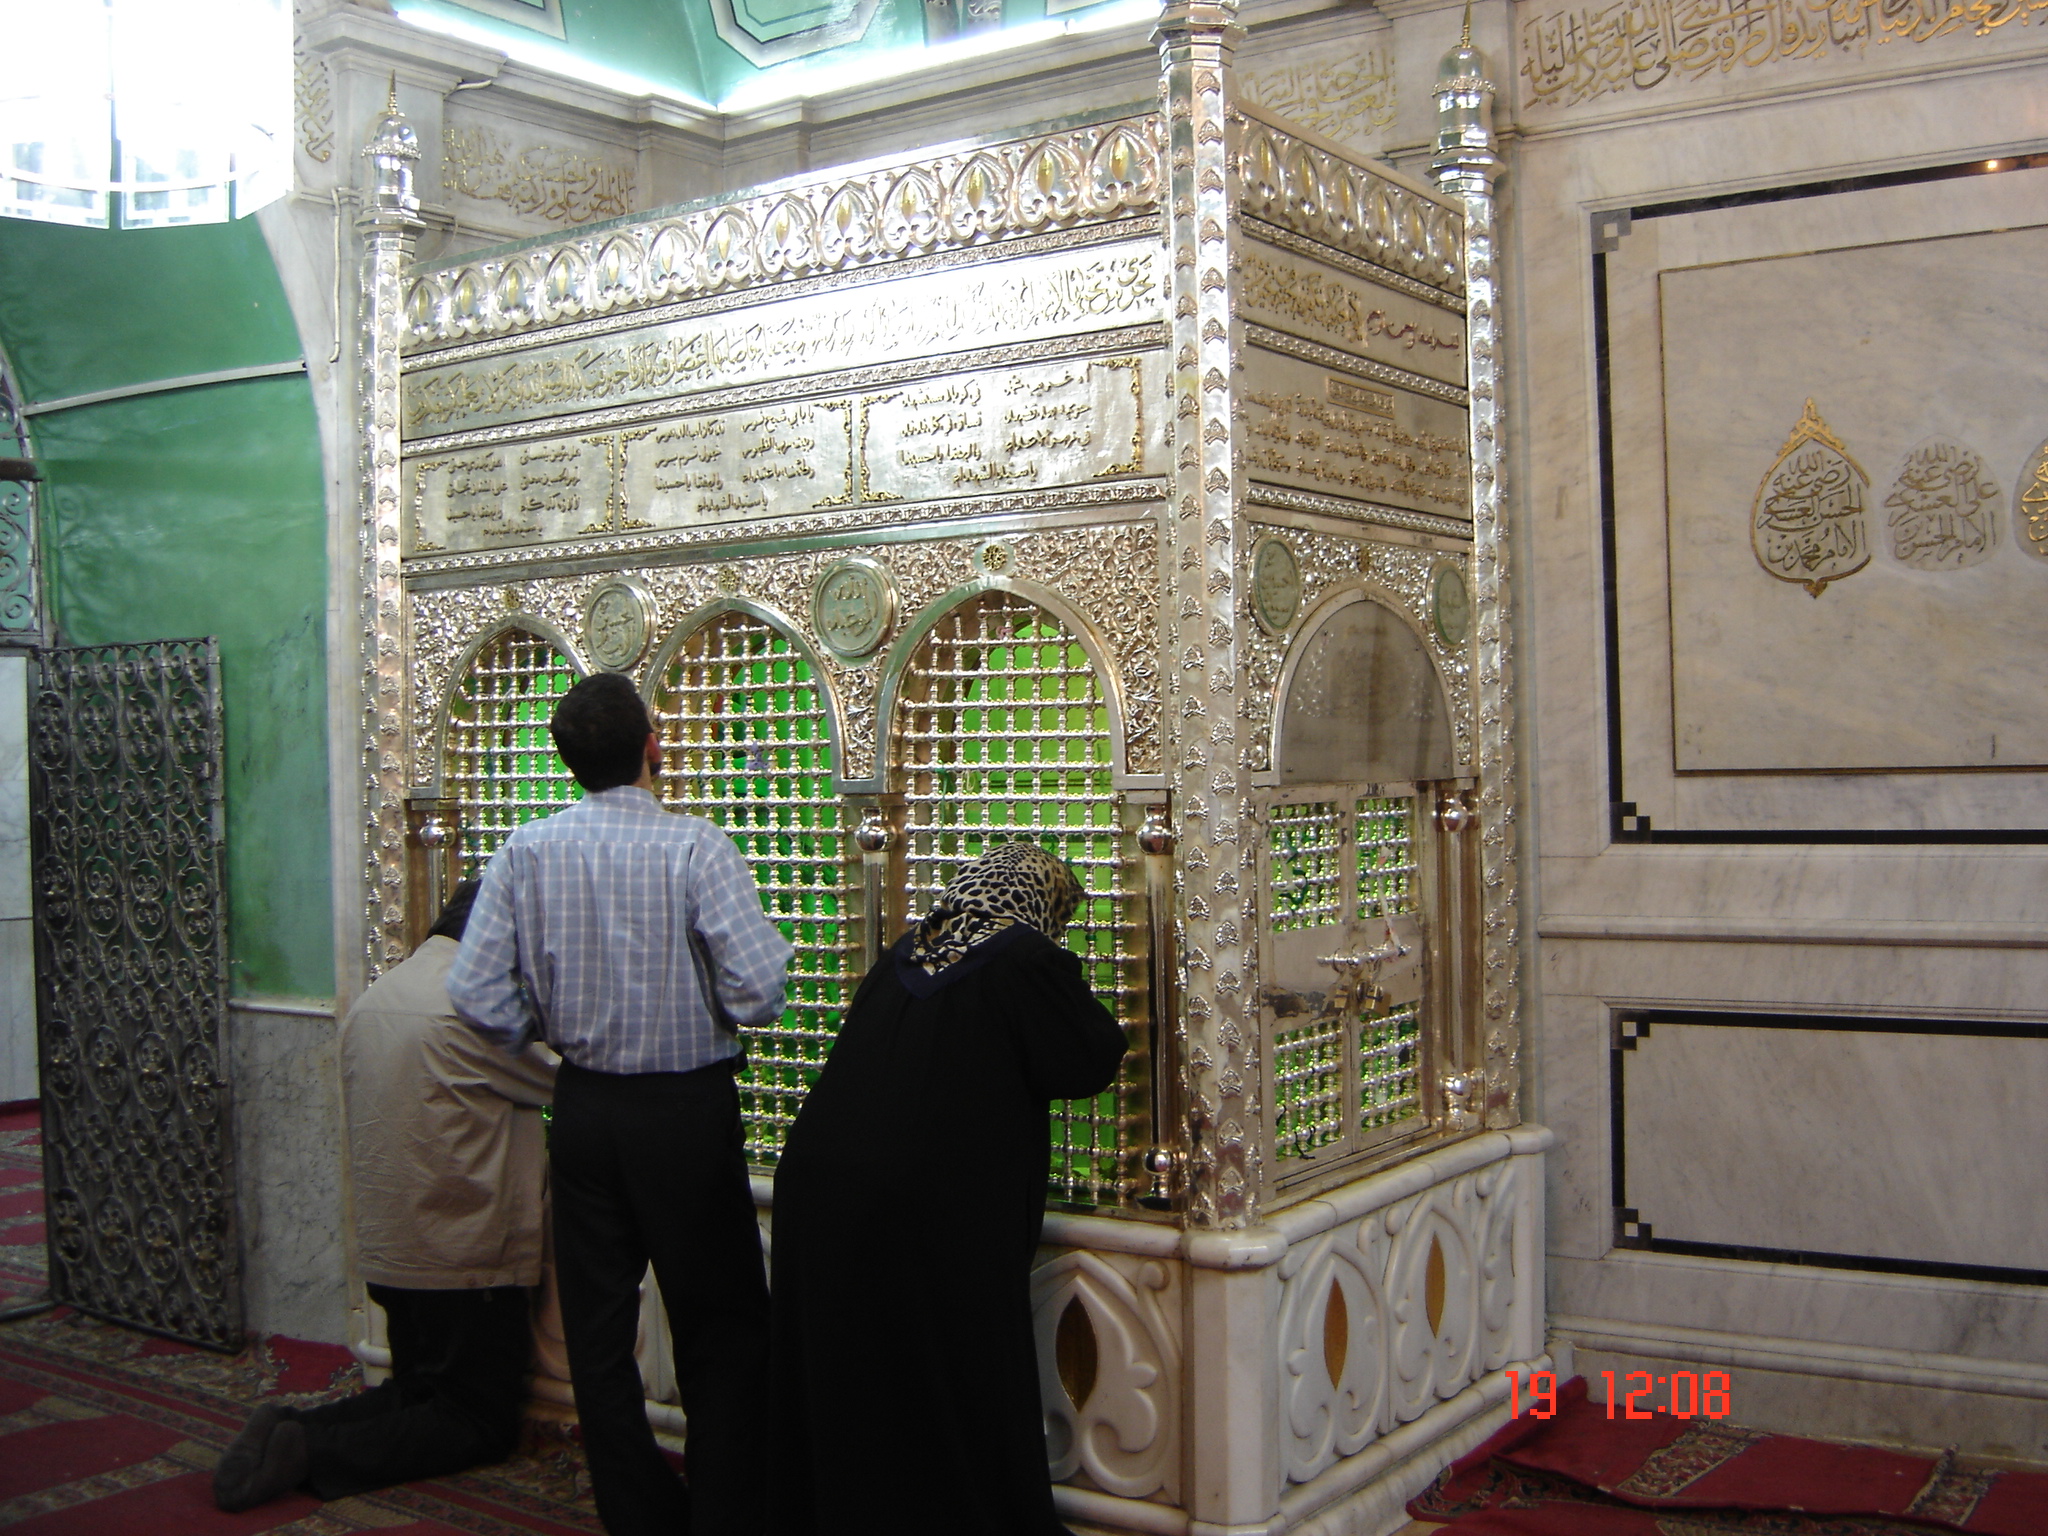 Figure 1. Shrine of Hussein within the Great (Umayyad) Mosque, Damascus (Photo copyright 2005 Frederik Questier and Yanna Van Wesemael)